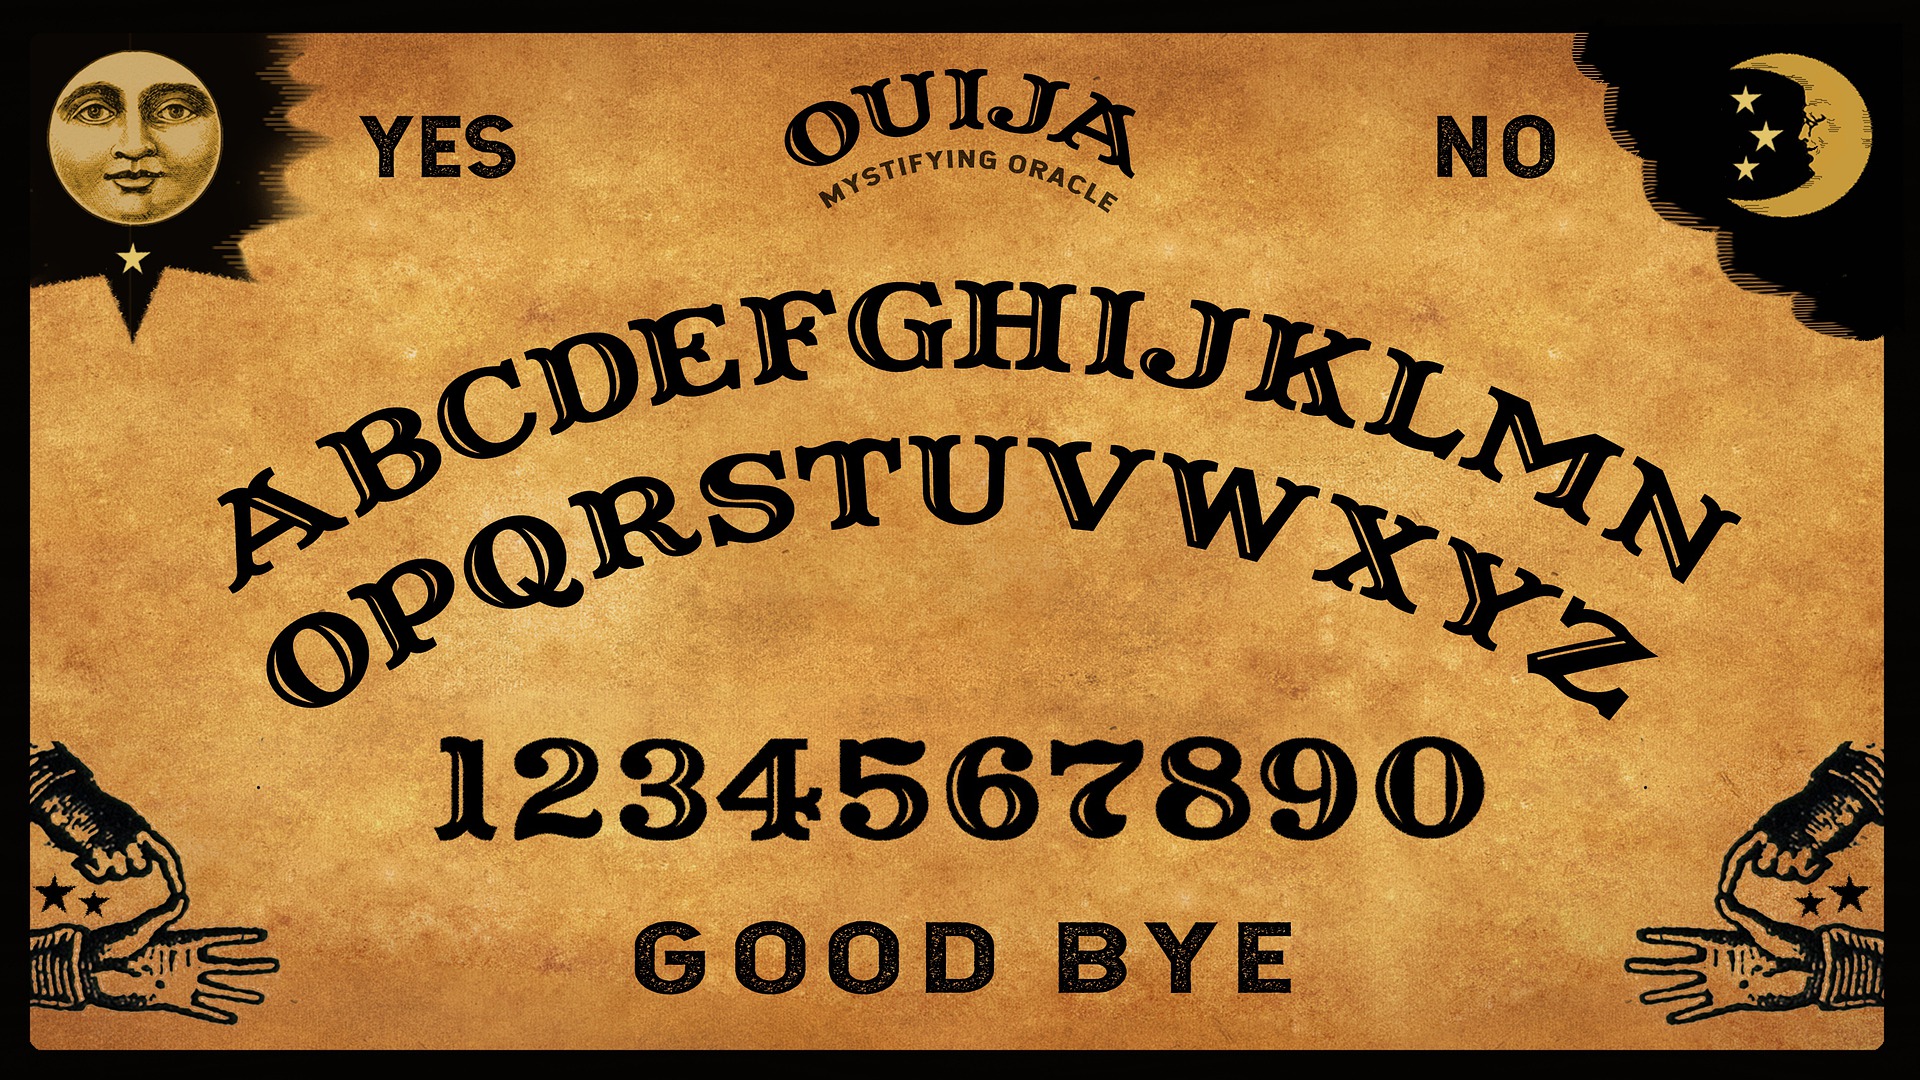 Rules of the ouija board